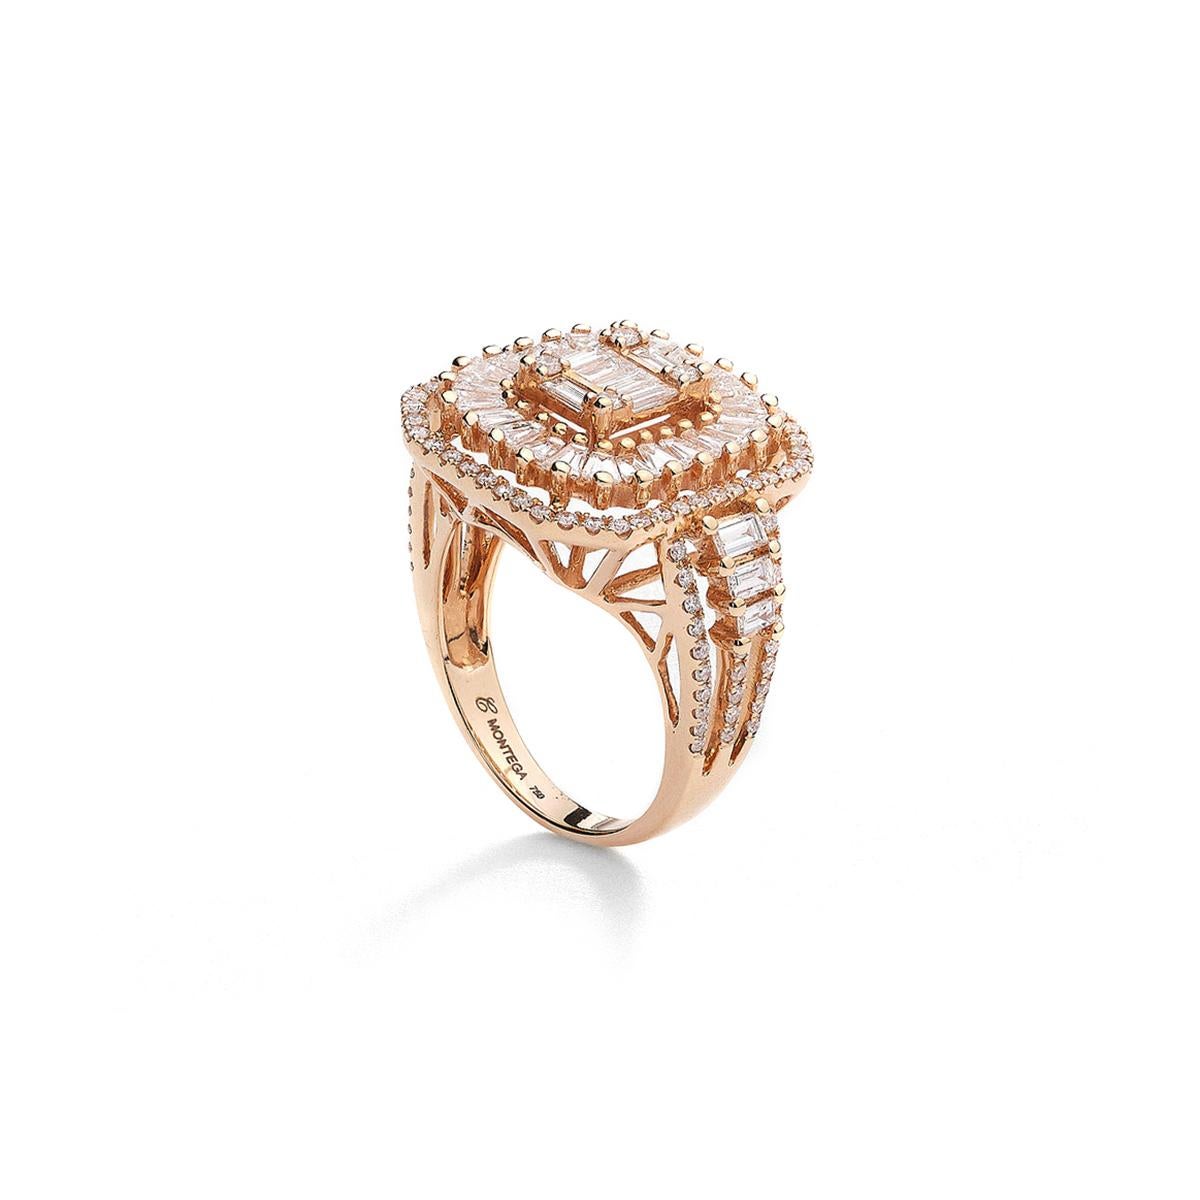 Immerse yourself in the breathtaking beauty of our exquisite Ring in 18kt Pink Gold. This truly captivating piece is a stunning showcase of elegance and sophistication, designed to make a lasting impression.

Crafted with the utmost precision and